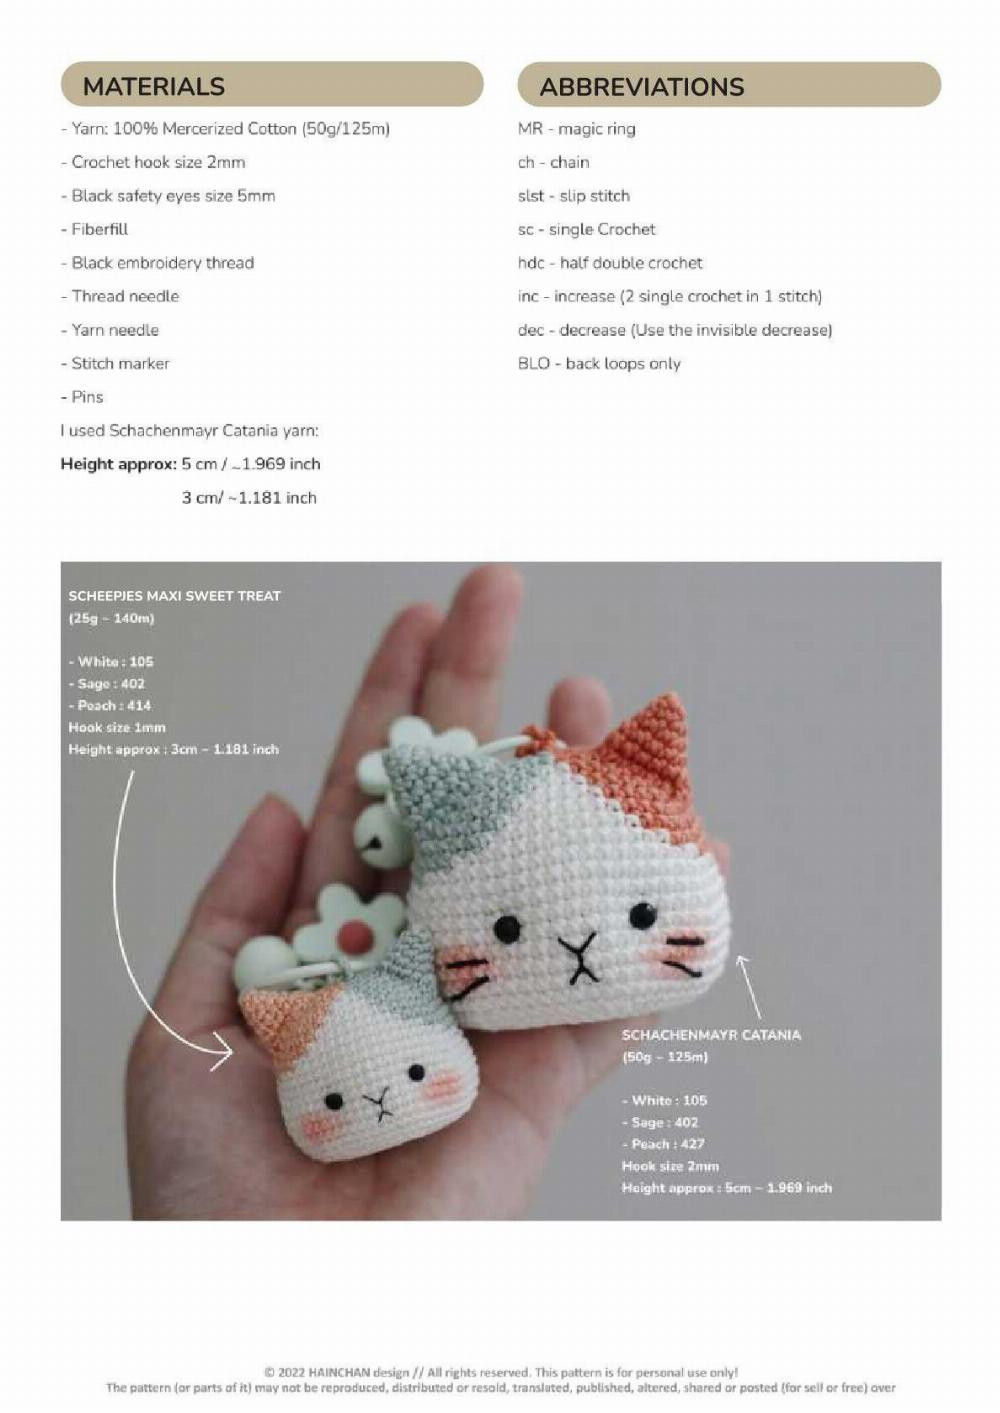 NANA THE BUNNY , rey the little bunny, cat keychain, hello kitty, calio cat, lilac bicolor catscotish fold cat....